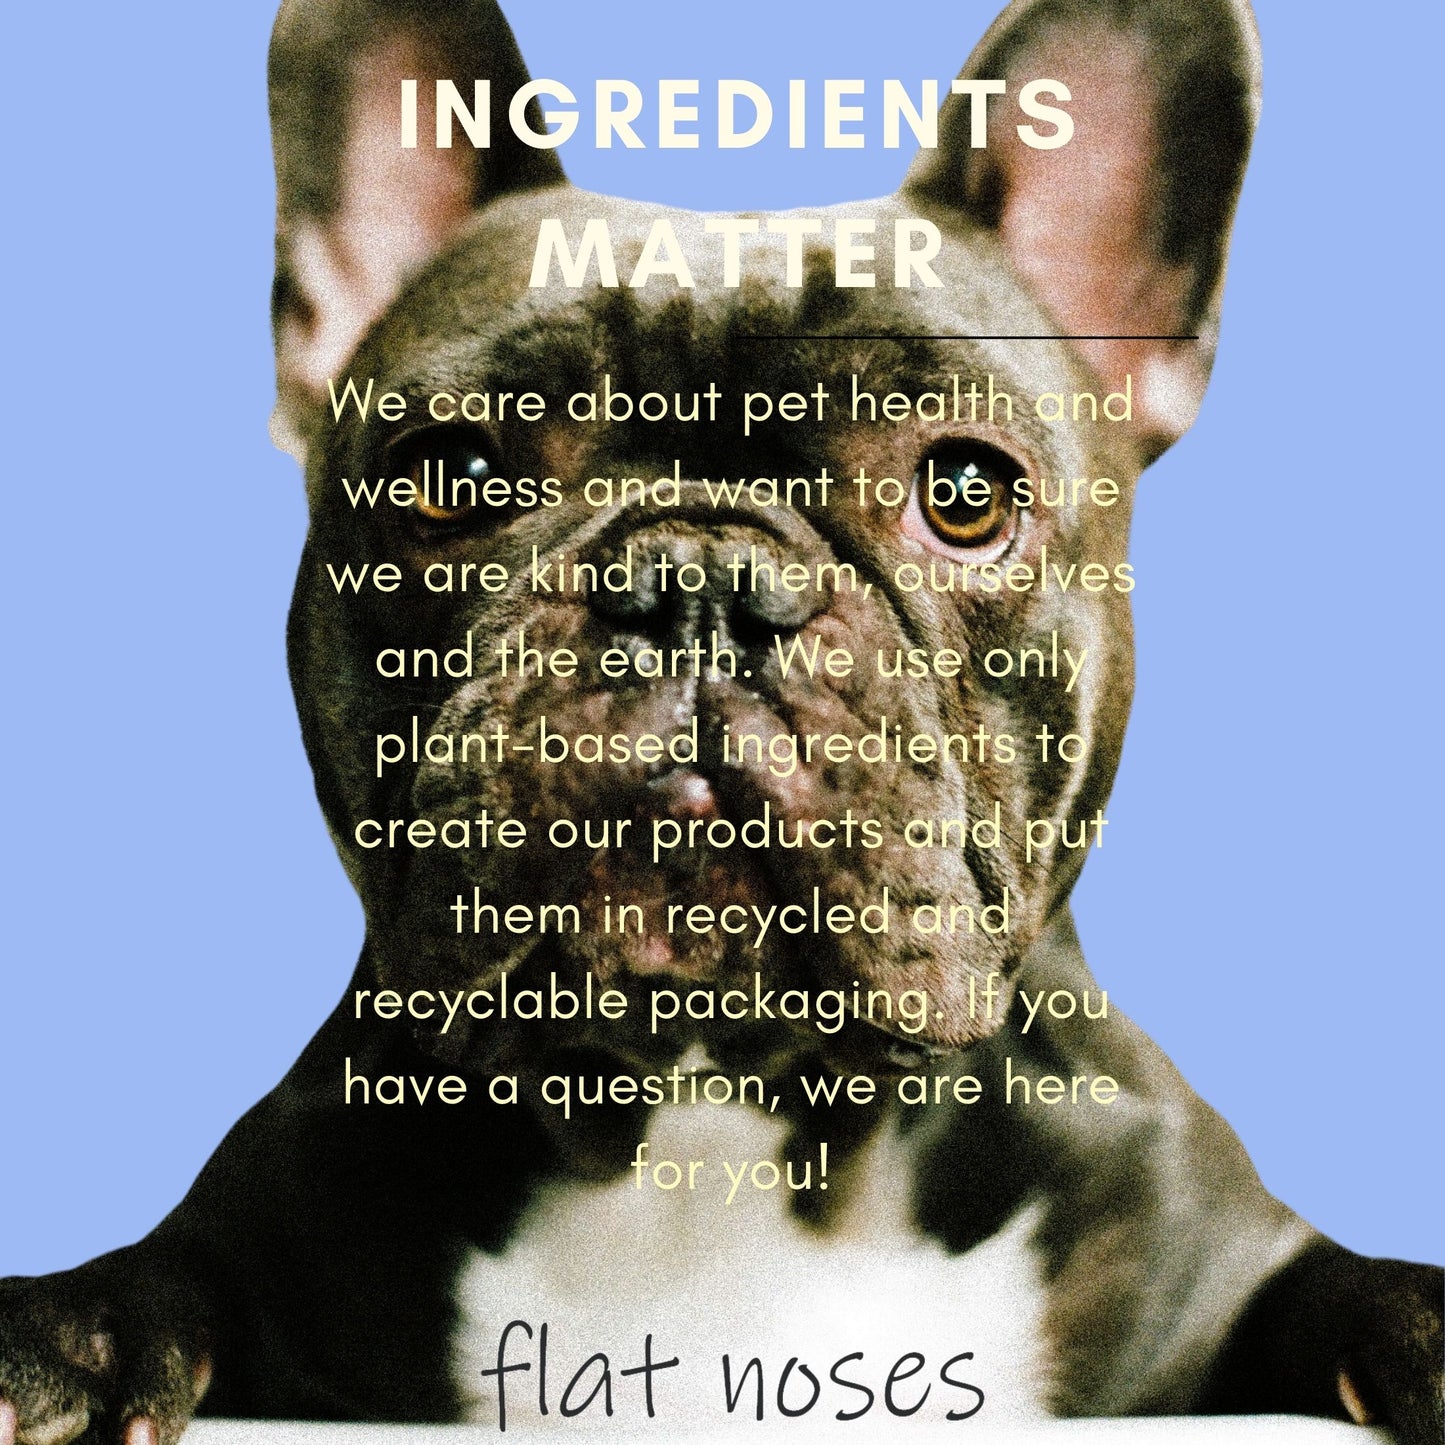 Flat Noses All in One Tearless All Natural Conditioning Shampoo - Perfect for Frenchies Bulldogs Boxers Pugs Brachycephalic - Aloe and Provitamin B5 Keep Dog Coat Soft, Shiny - Sulfate Free